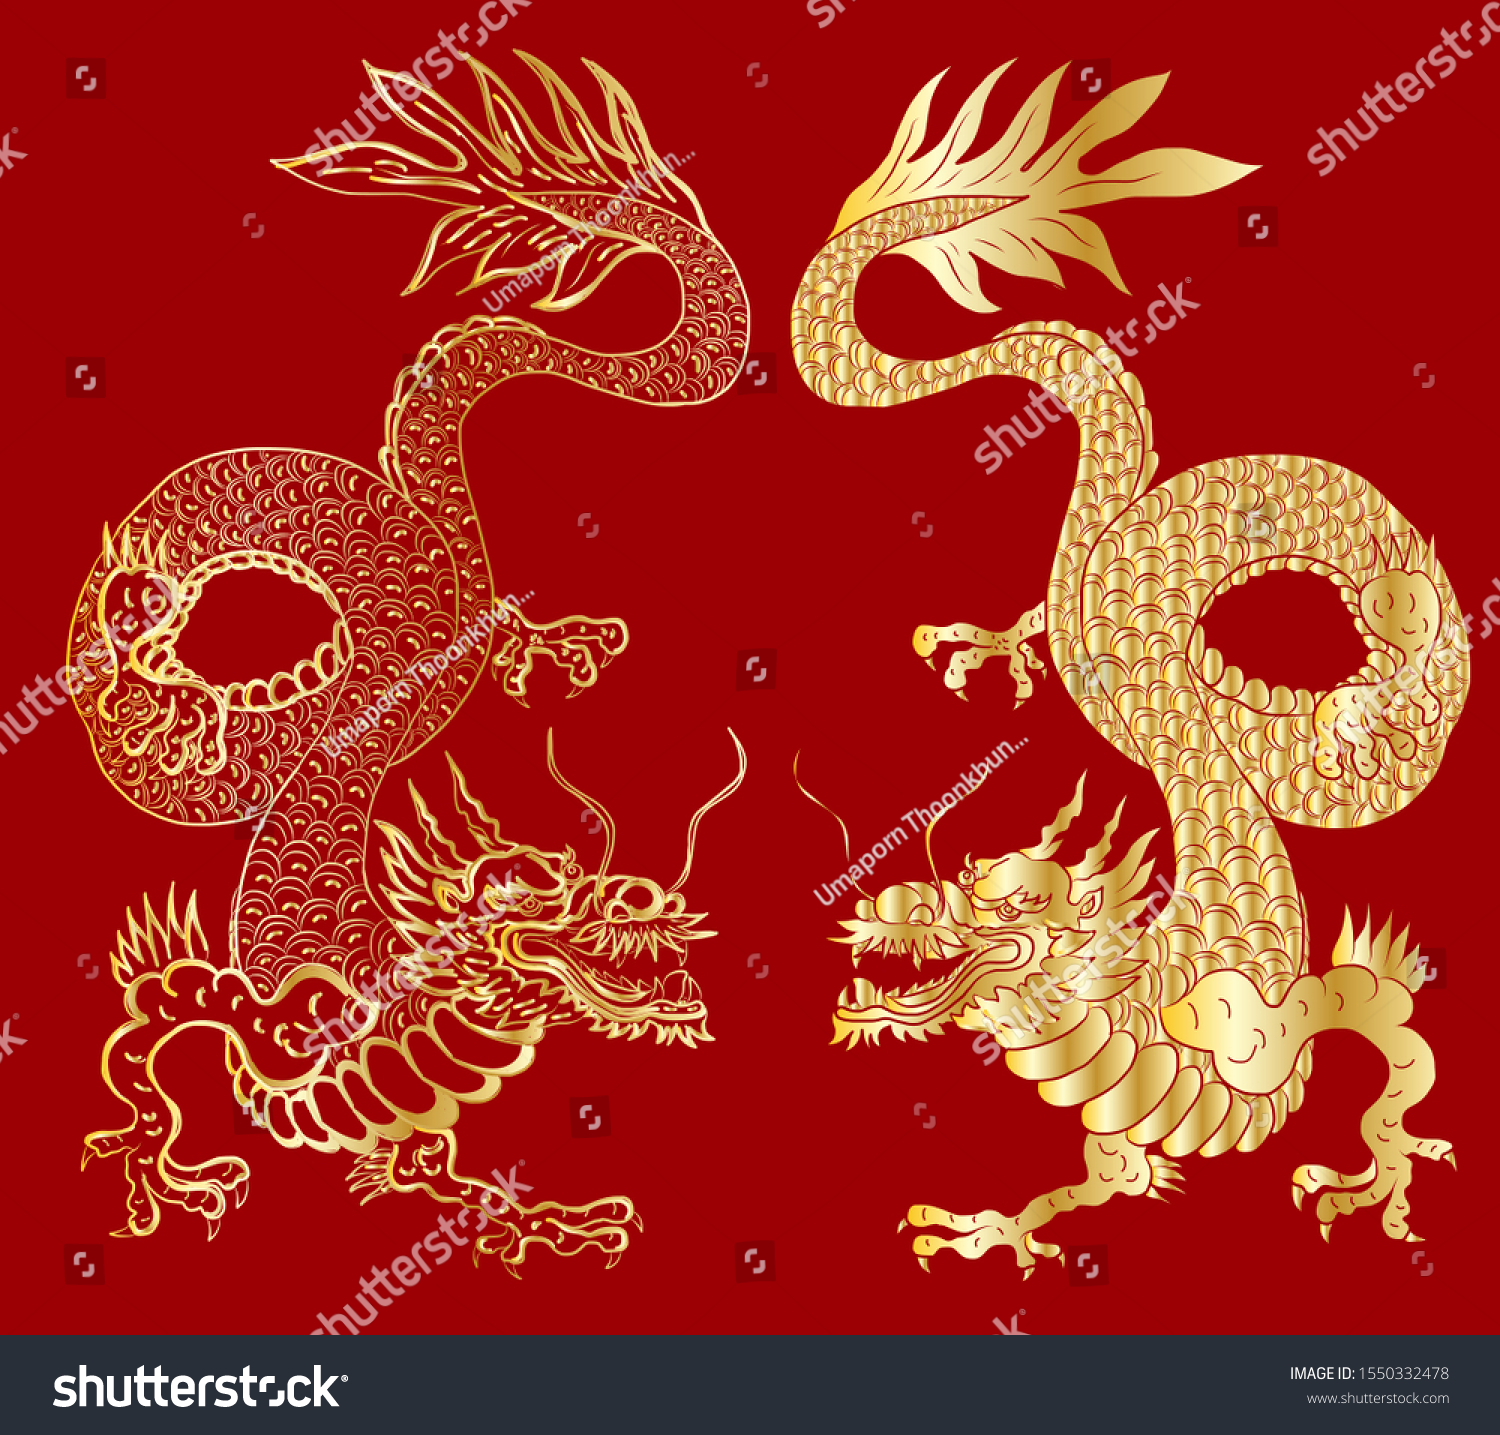 Outline Chinese Dragon Illustration Tattoo Design Stock Vector Royalty Free